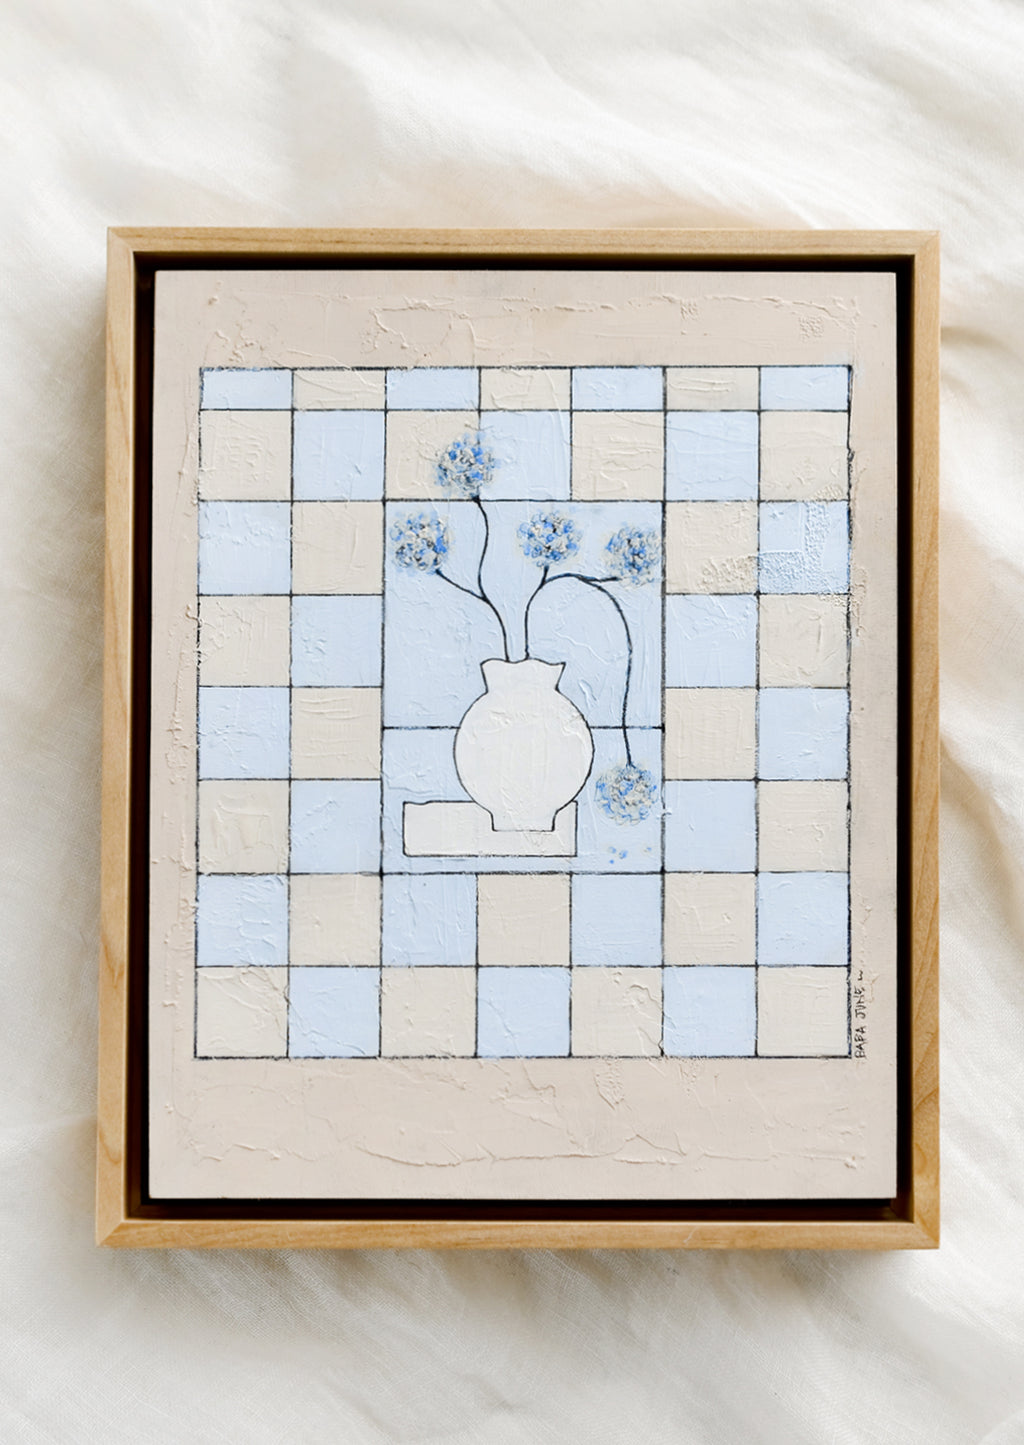 1: A framed original painting of still life vase with flowers on a checkered beige and periwinkle background.